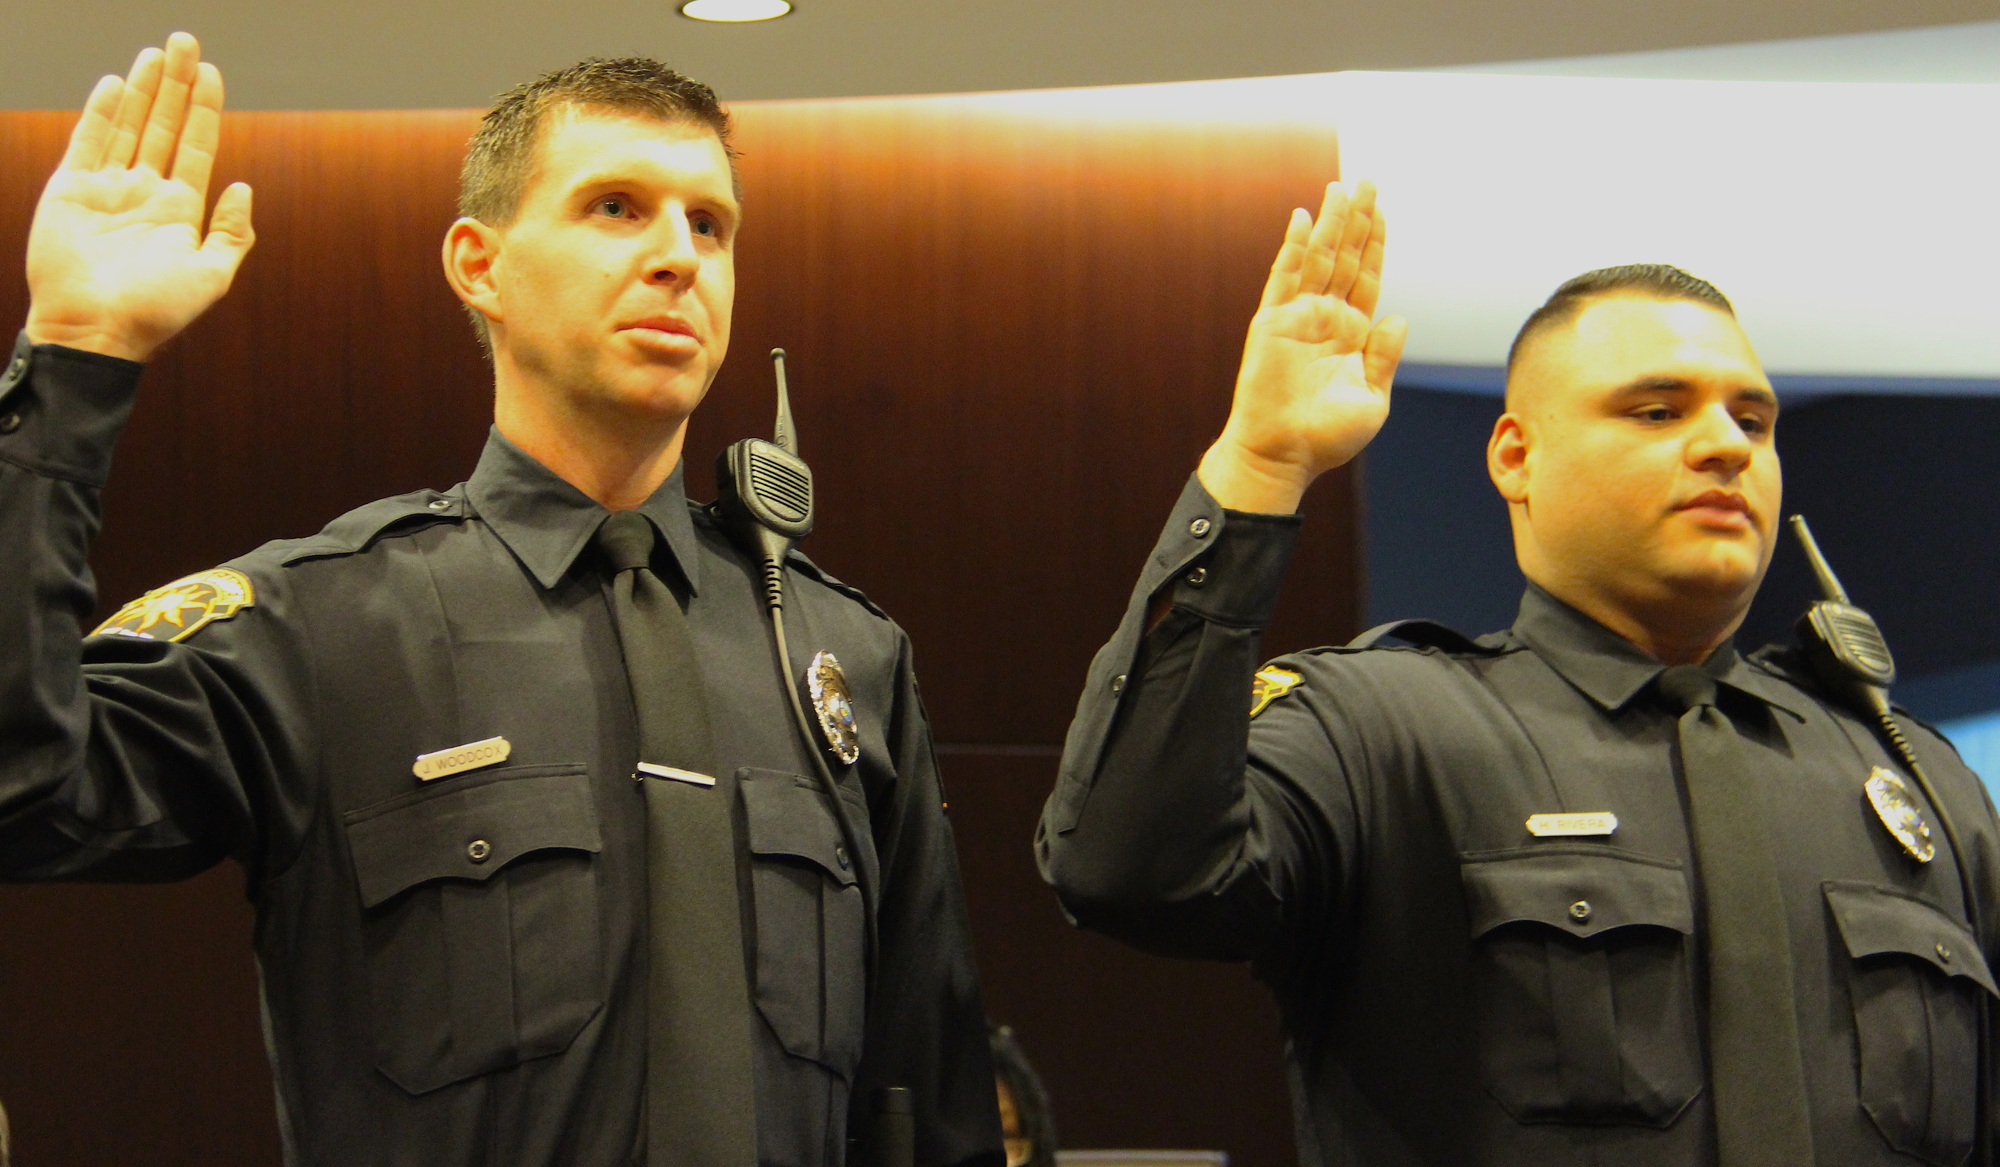 New Winter Garden Police Officers Jonathan Woodcox, left, and Heriberto Rivera were sworn in at the Winter Garden City Commission meeting on April 12.